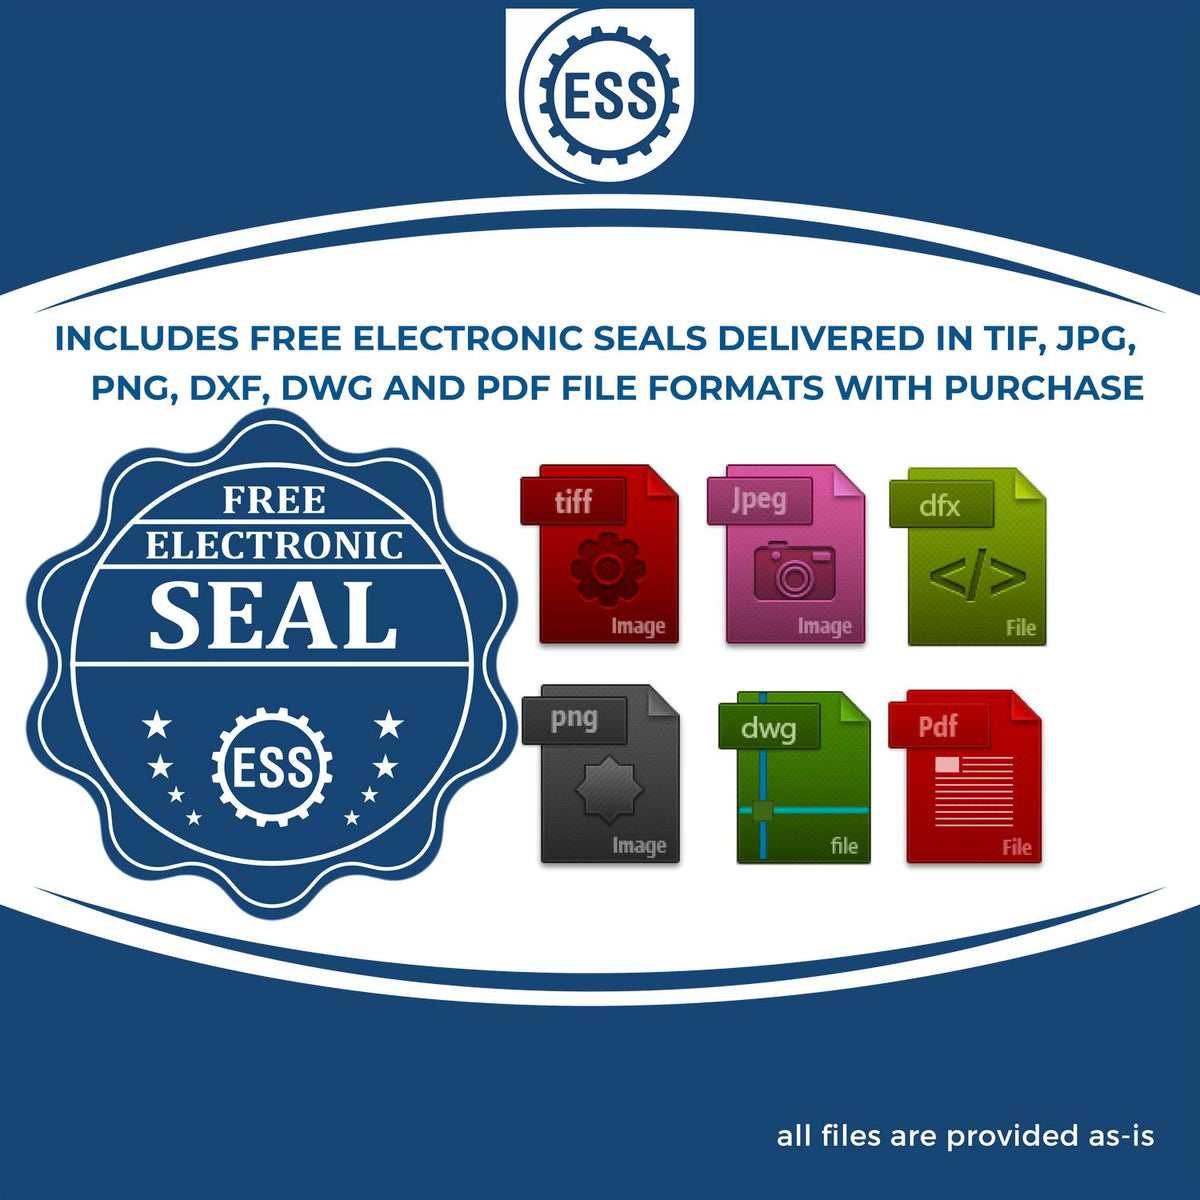 An infographic for the free electronic seal for the Long Reach Ohio Geology Seal illustrating the different file type icons such as DXF, DWG, TIF, JPG and PNG.